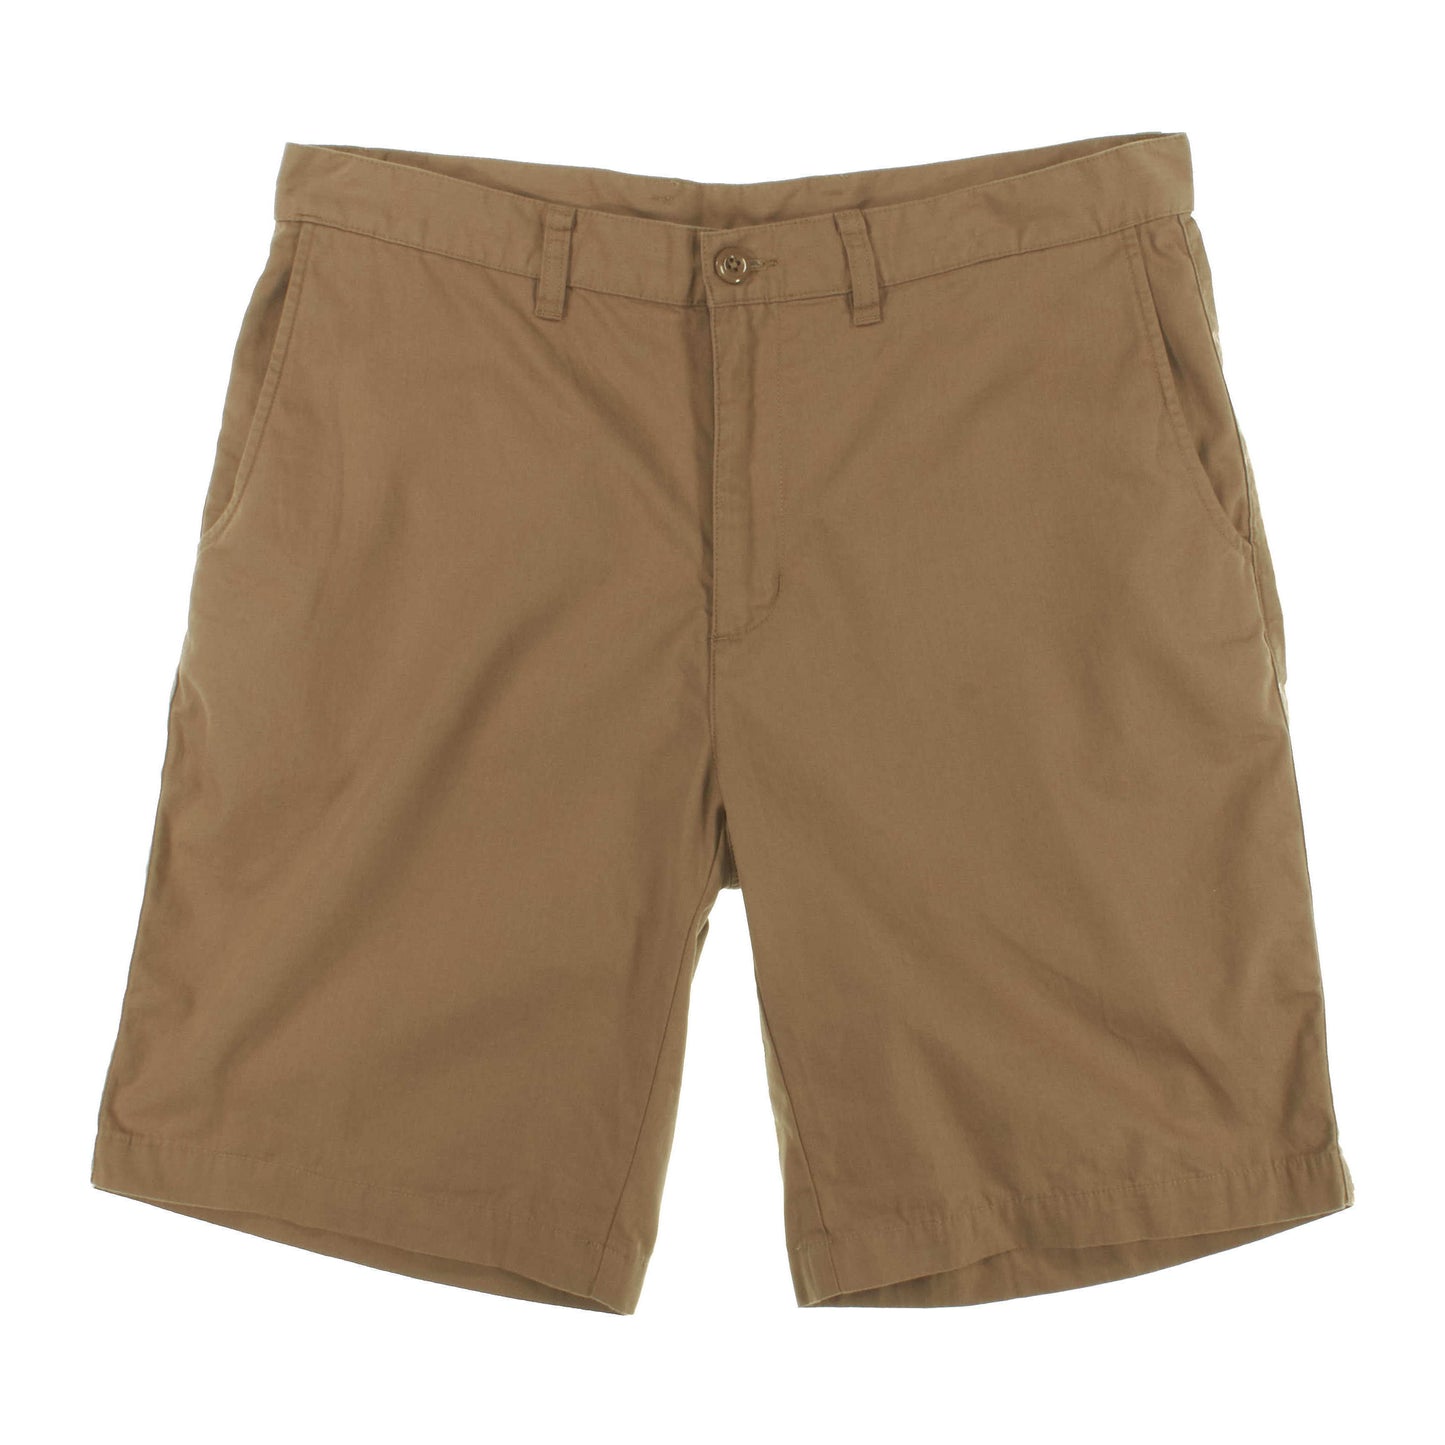 M's All-Wear Shorts - 10""